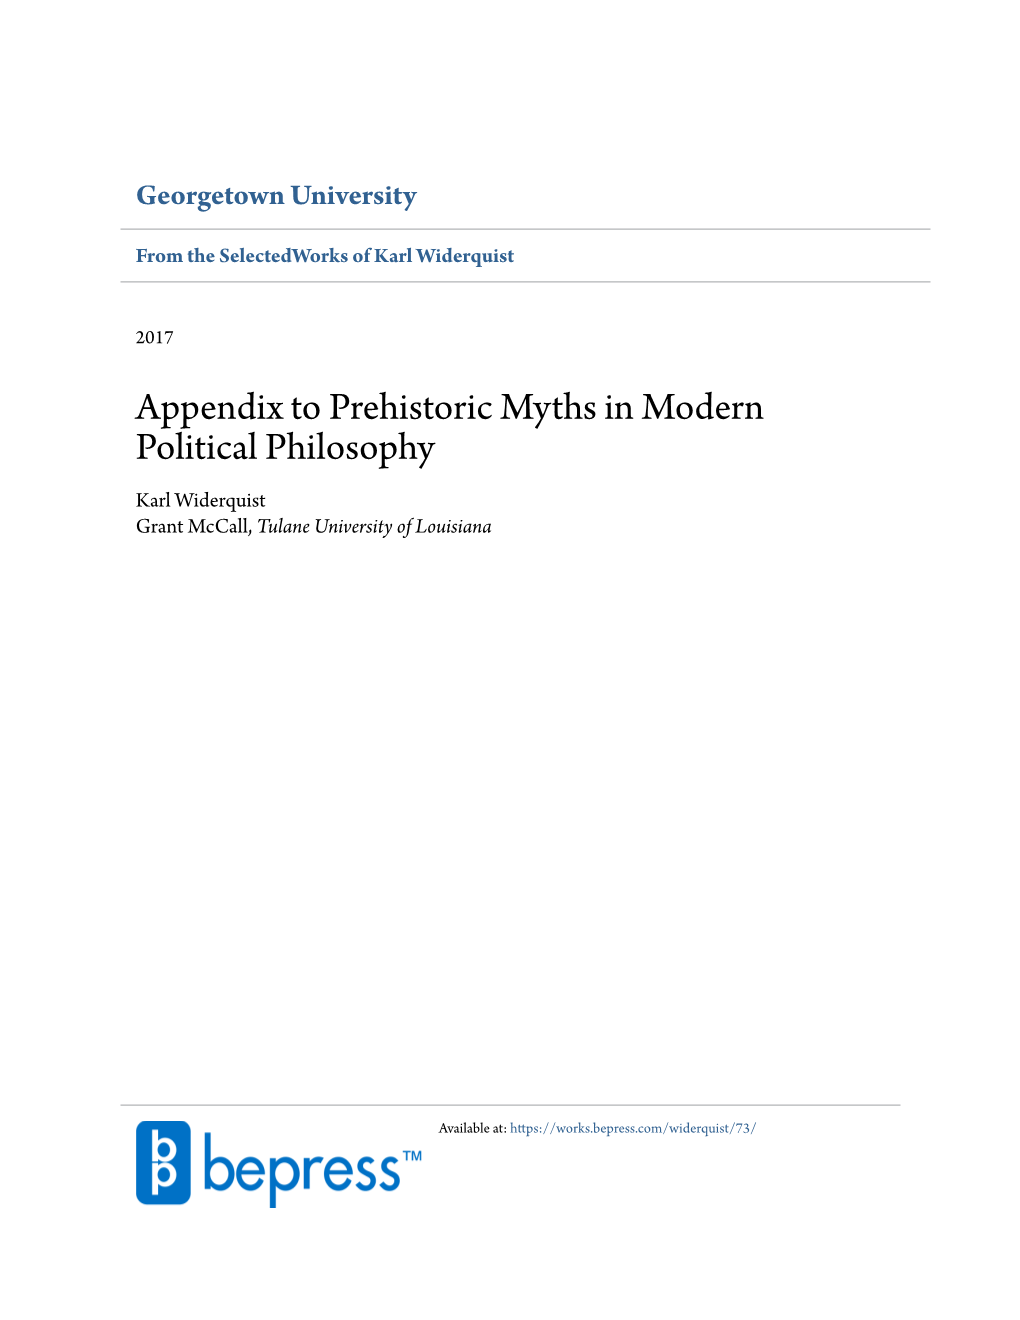 Appendix to Prehistoric Myths in Modern Political Philosophy Karl Widerquist Grant Mccall, Tulane University of Louisiana